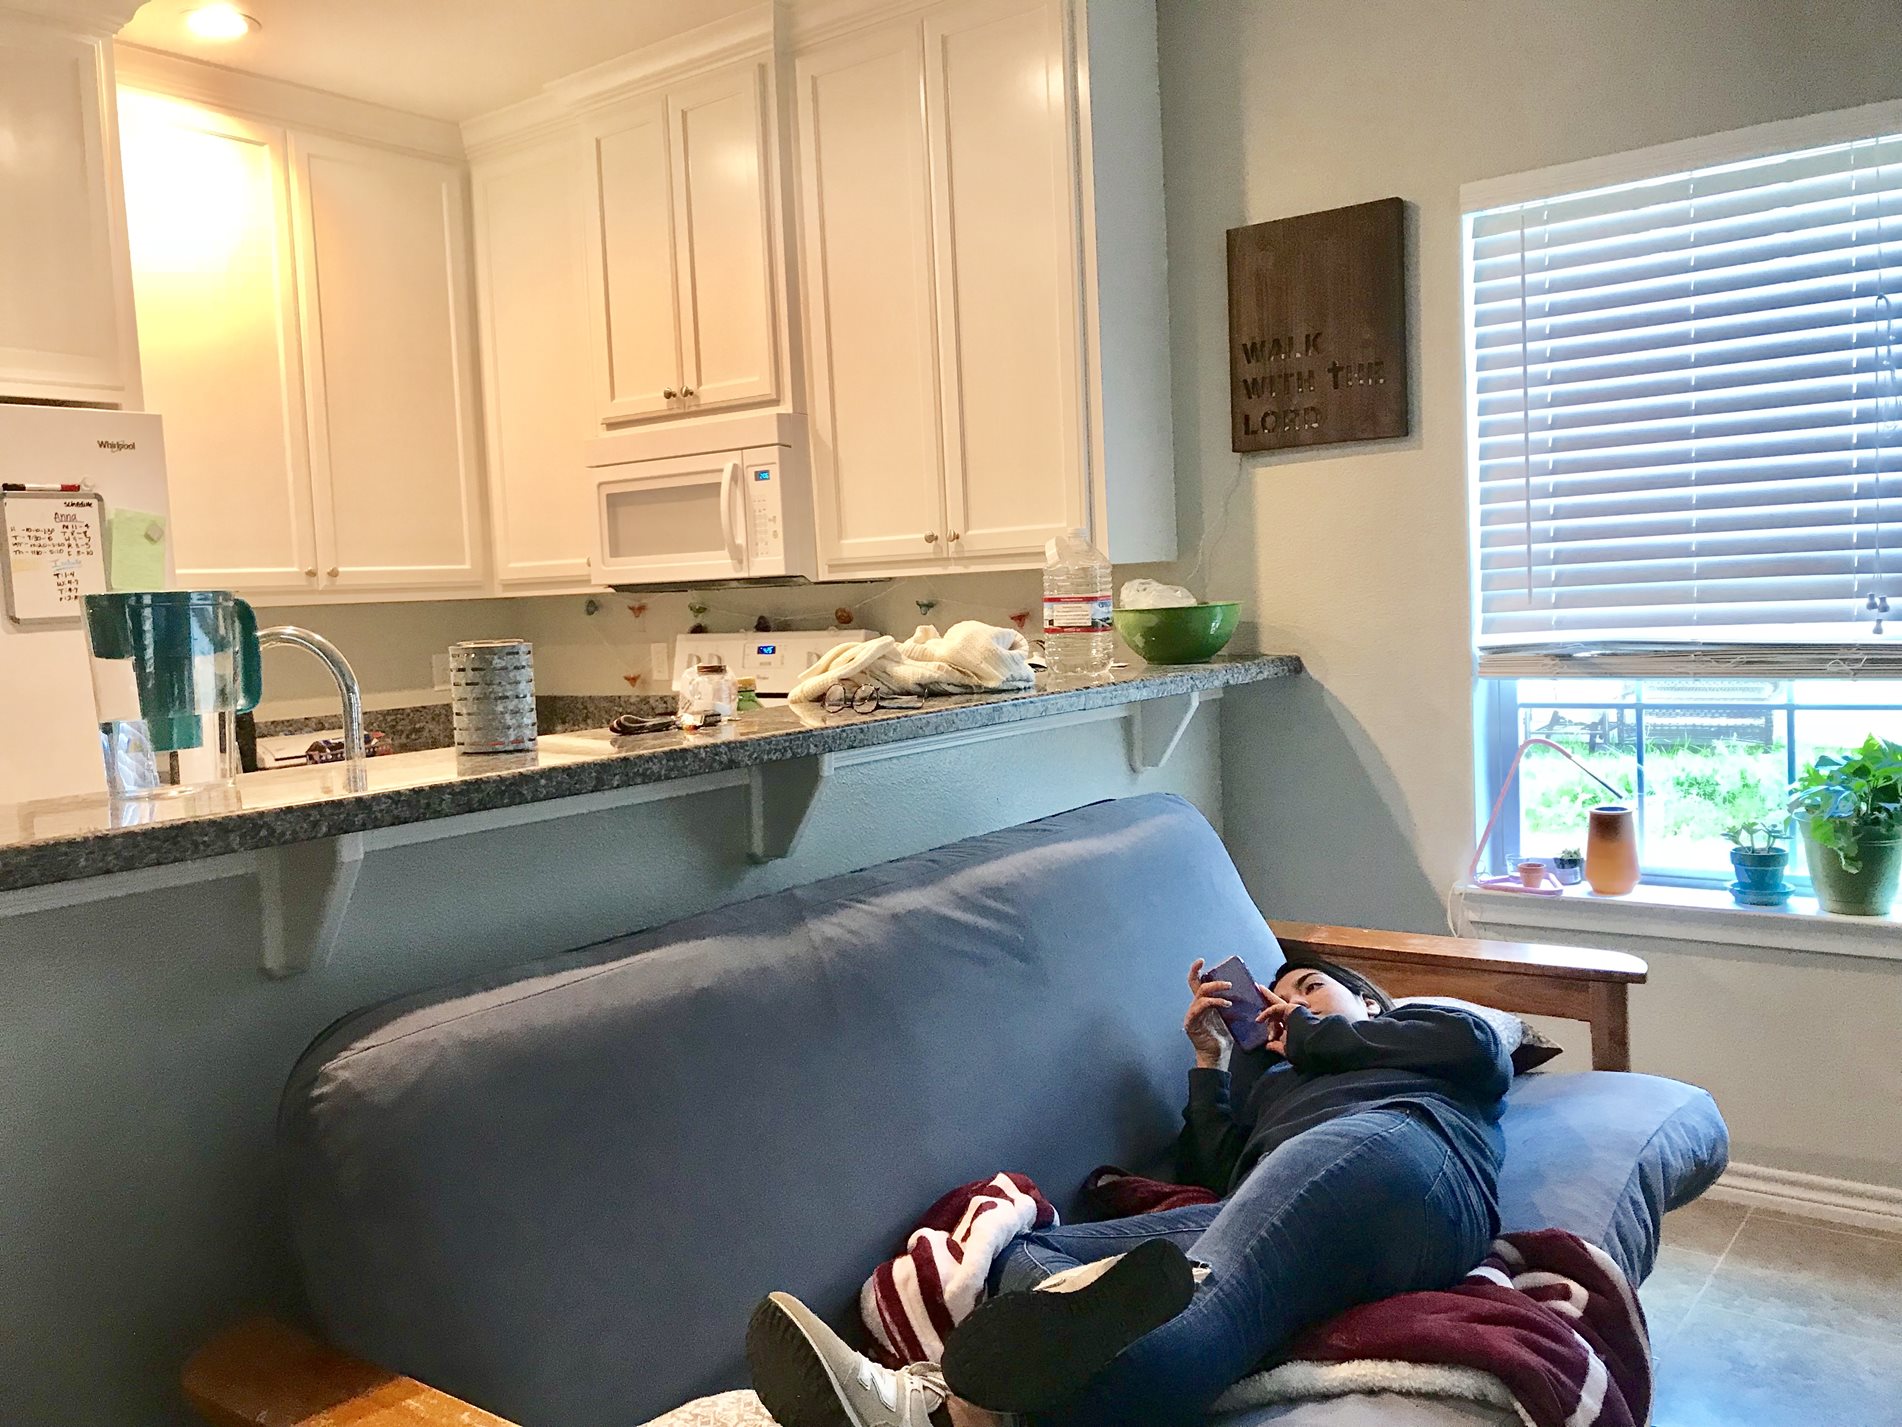 A student relaxes on their phone while laying on a couch.